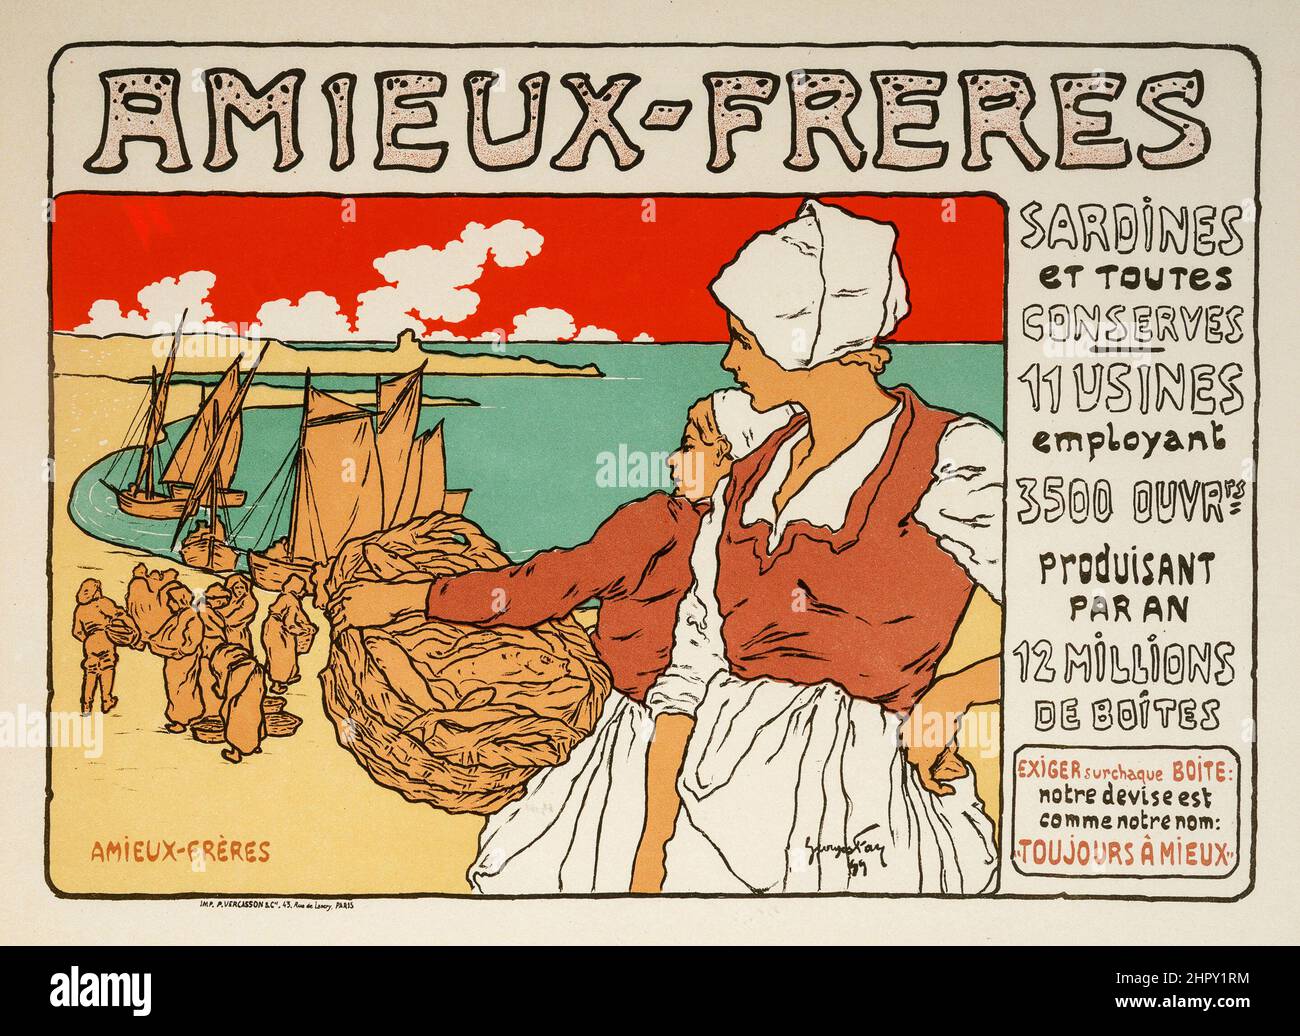 Georges Fay (19th Century). Amieux-Freres Sardines (from Les Maitres de L'Affiche), plate 183. Lithograph in colors. 1899. Stock Photo